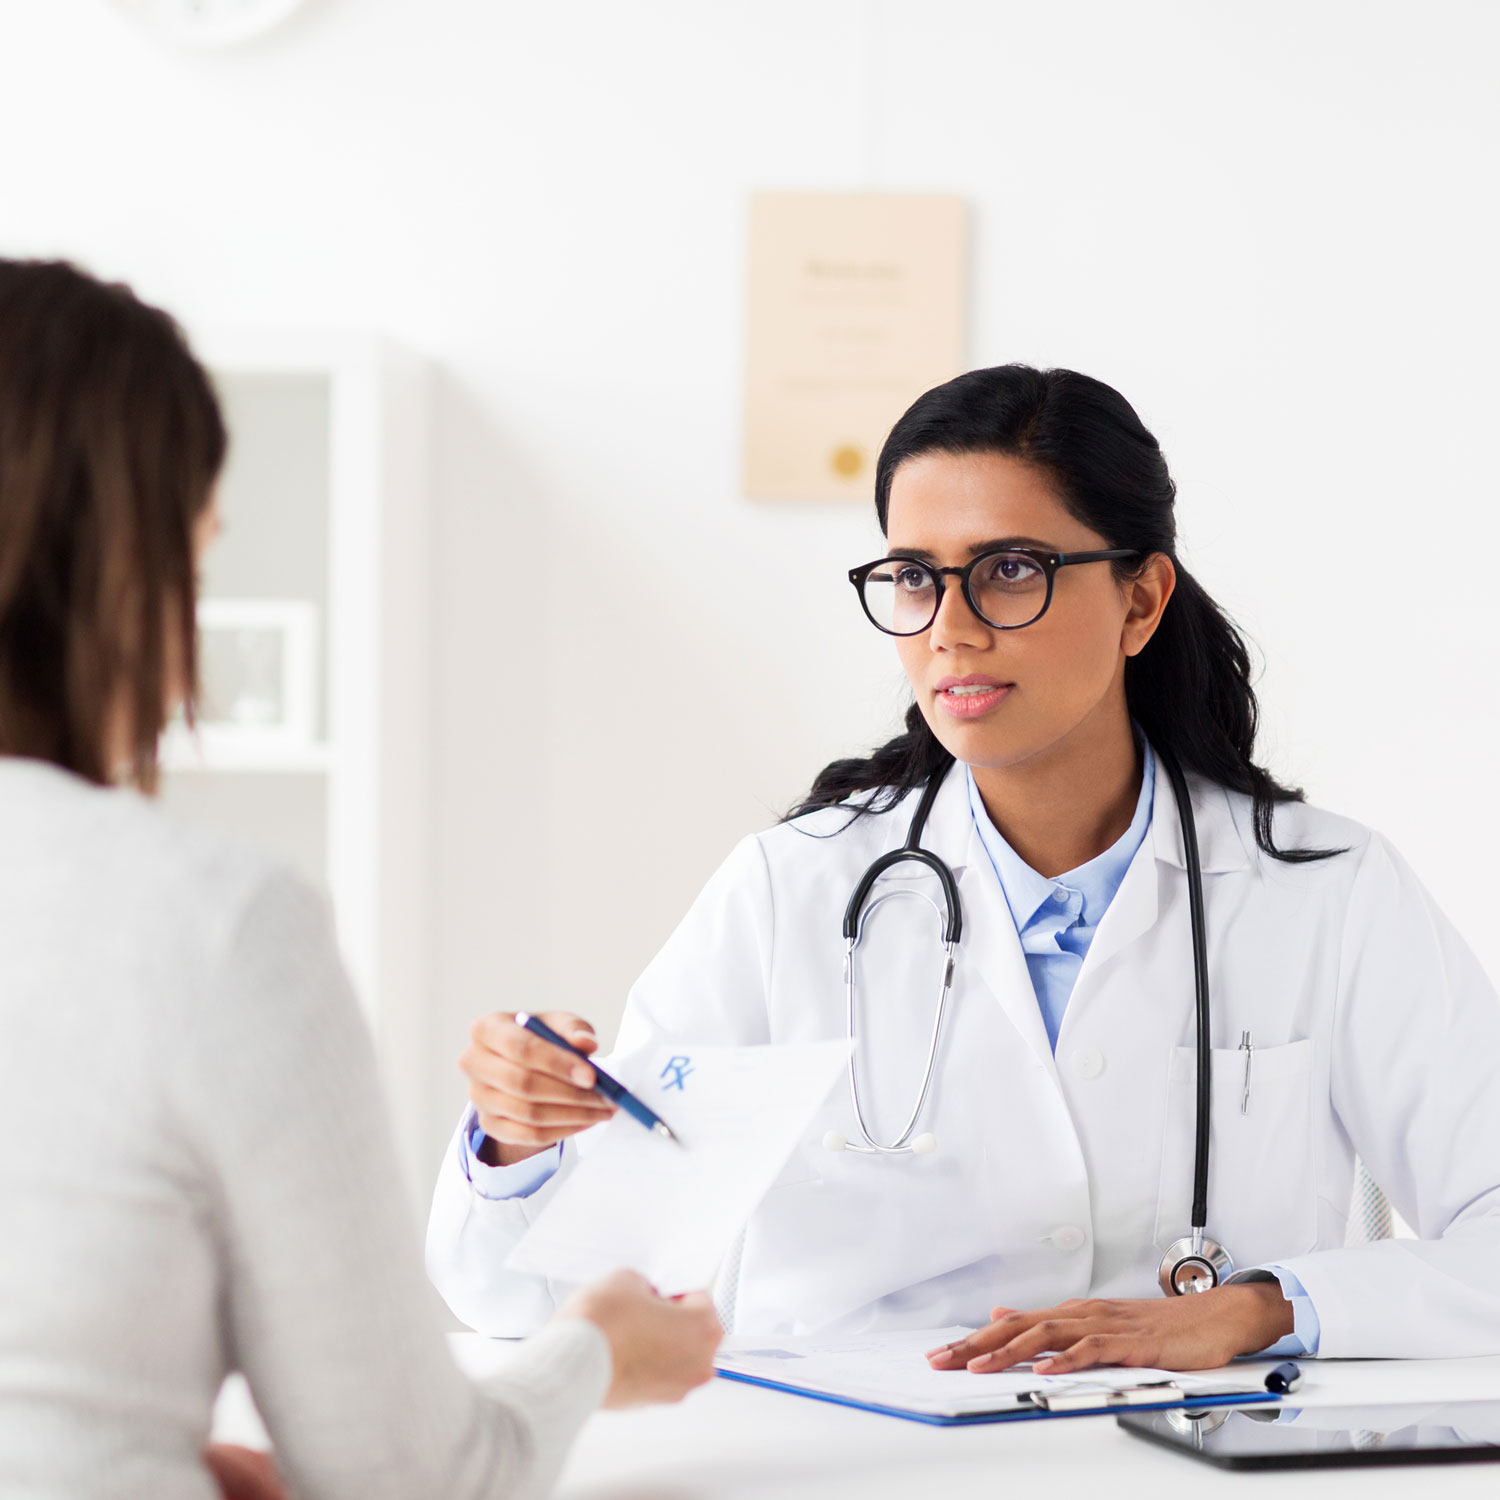 Doctor discussed fallopian tube diseases with patient | Arizona Reproductive Medicine Specialists